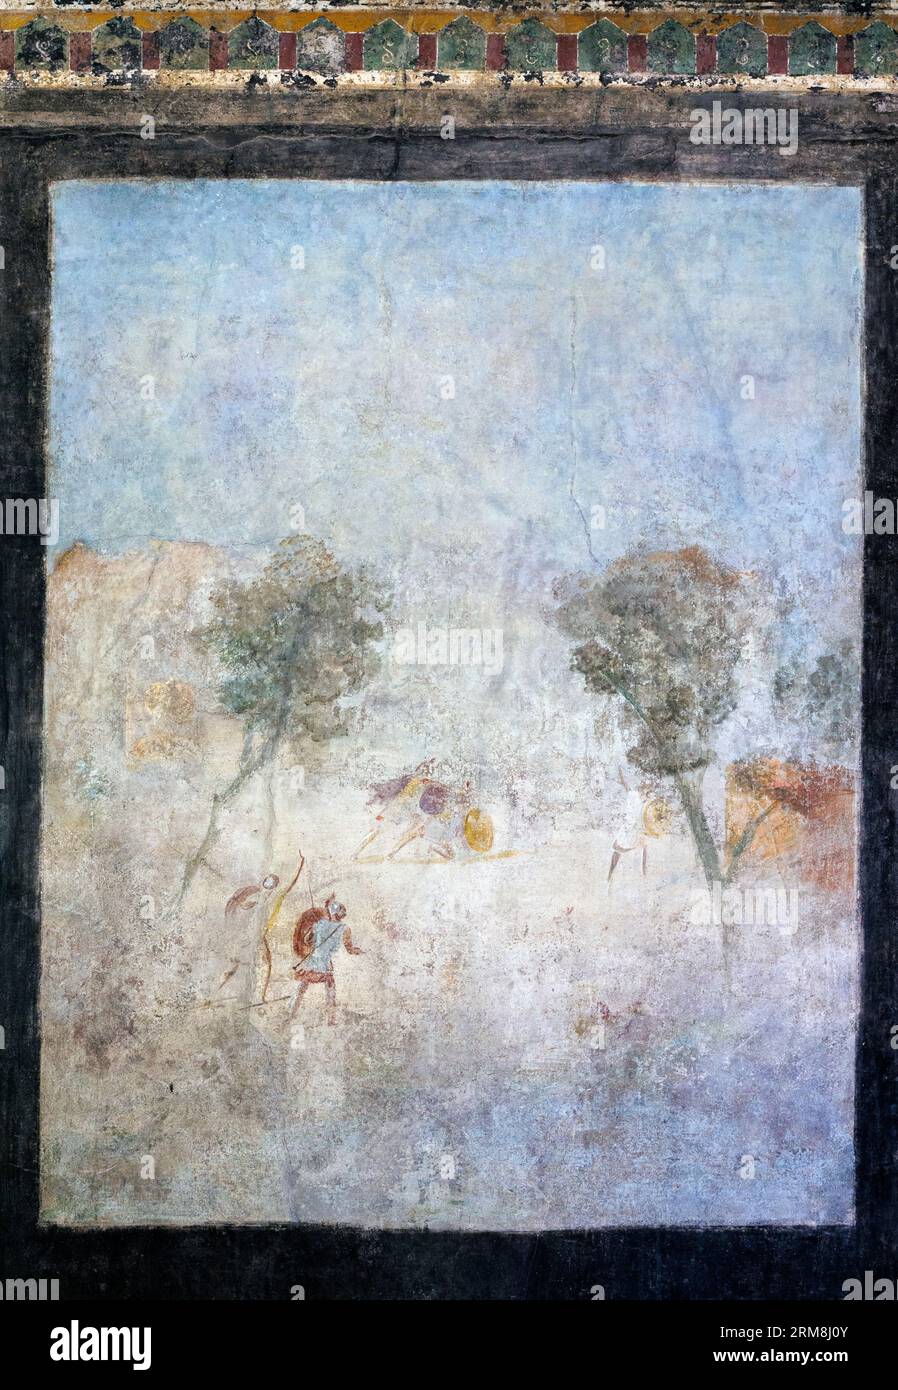 Pompeii Archaeological Site, Campania, Italy.  Fresco of a duel, or battle scene.  Casa del Frutteto.  Orchard House.  Pompeii, Herculaneum, and Torre Stock Photo